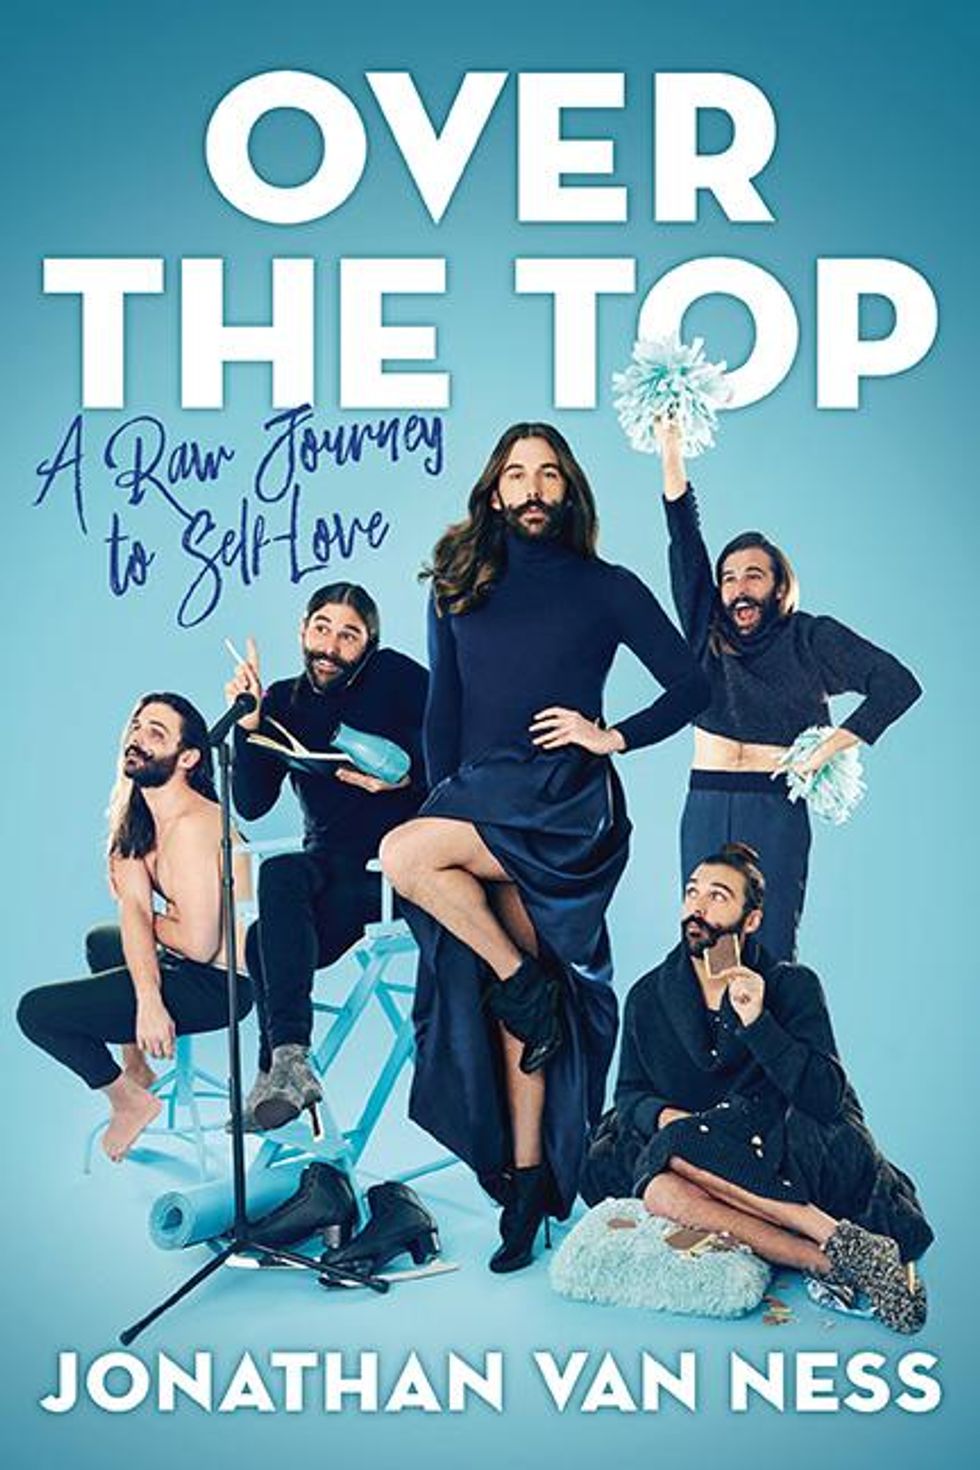 Jvn_overthetop_book_cover_web